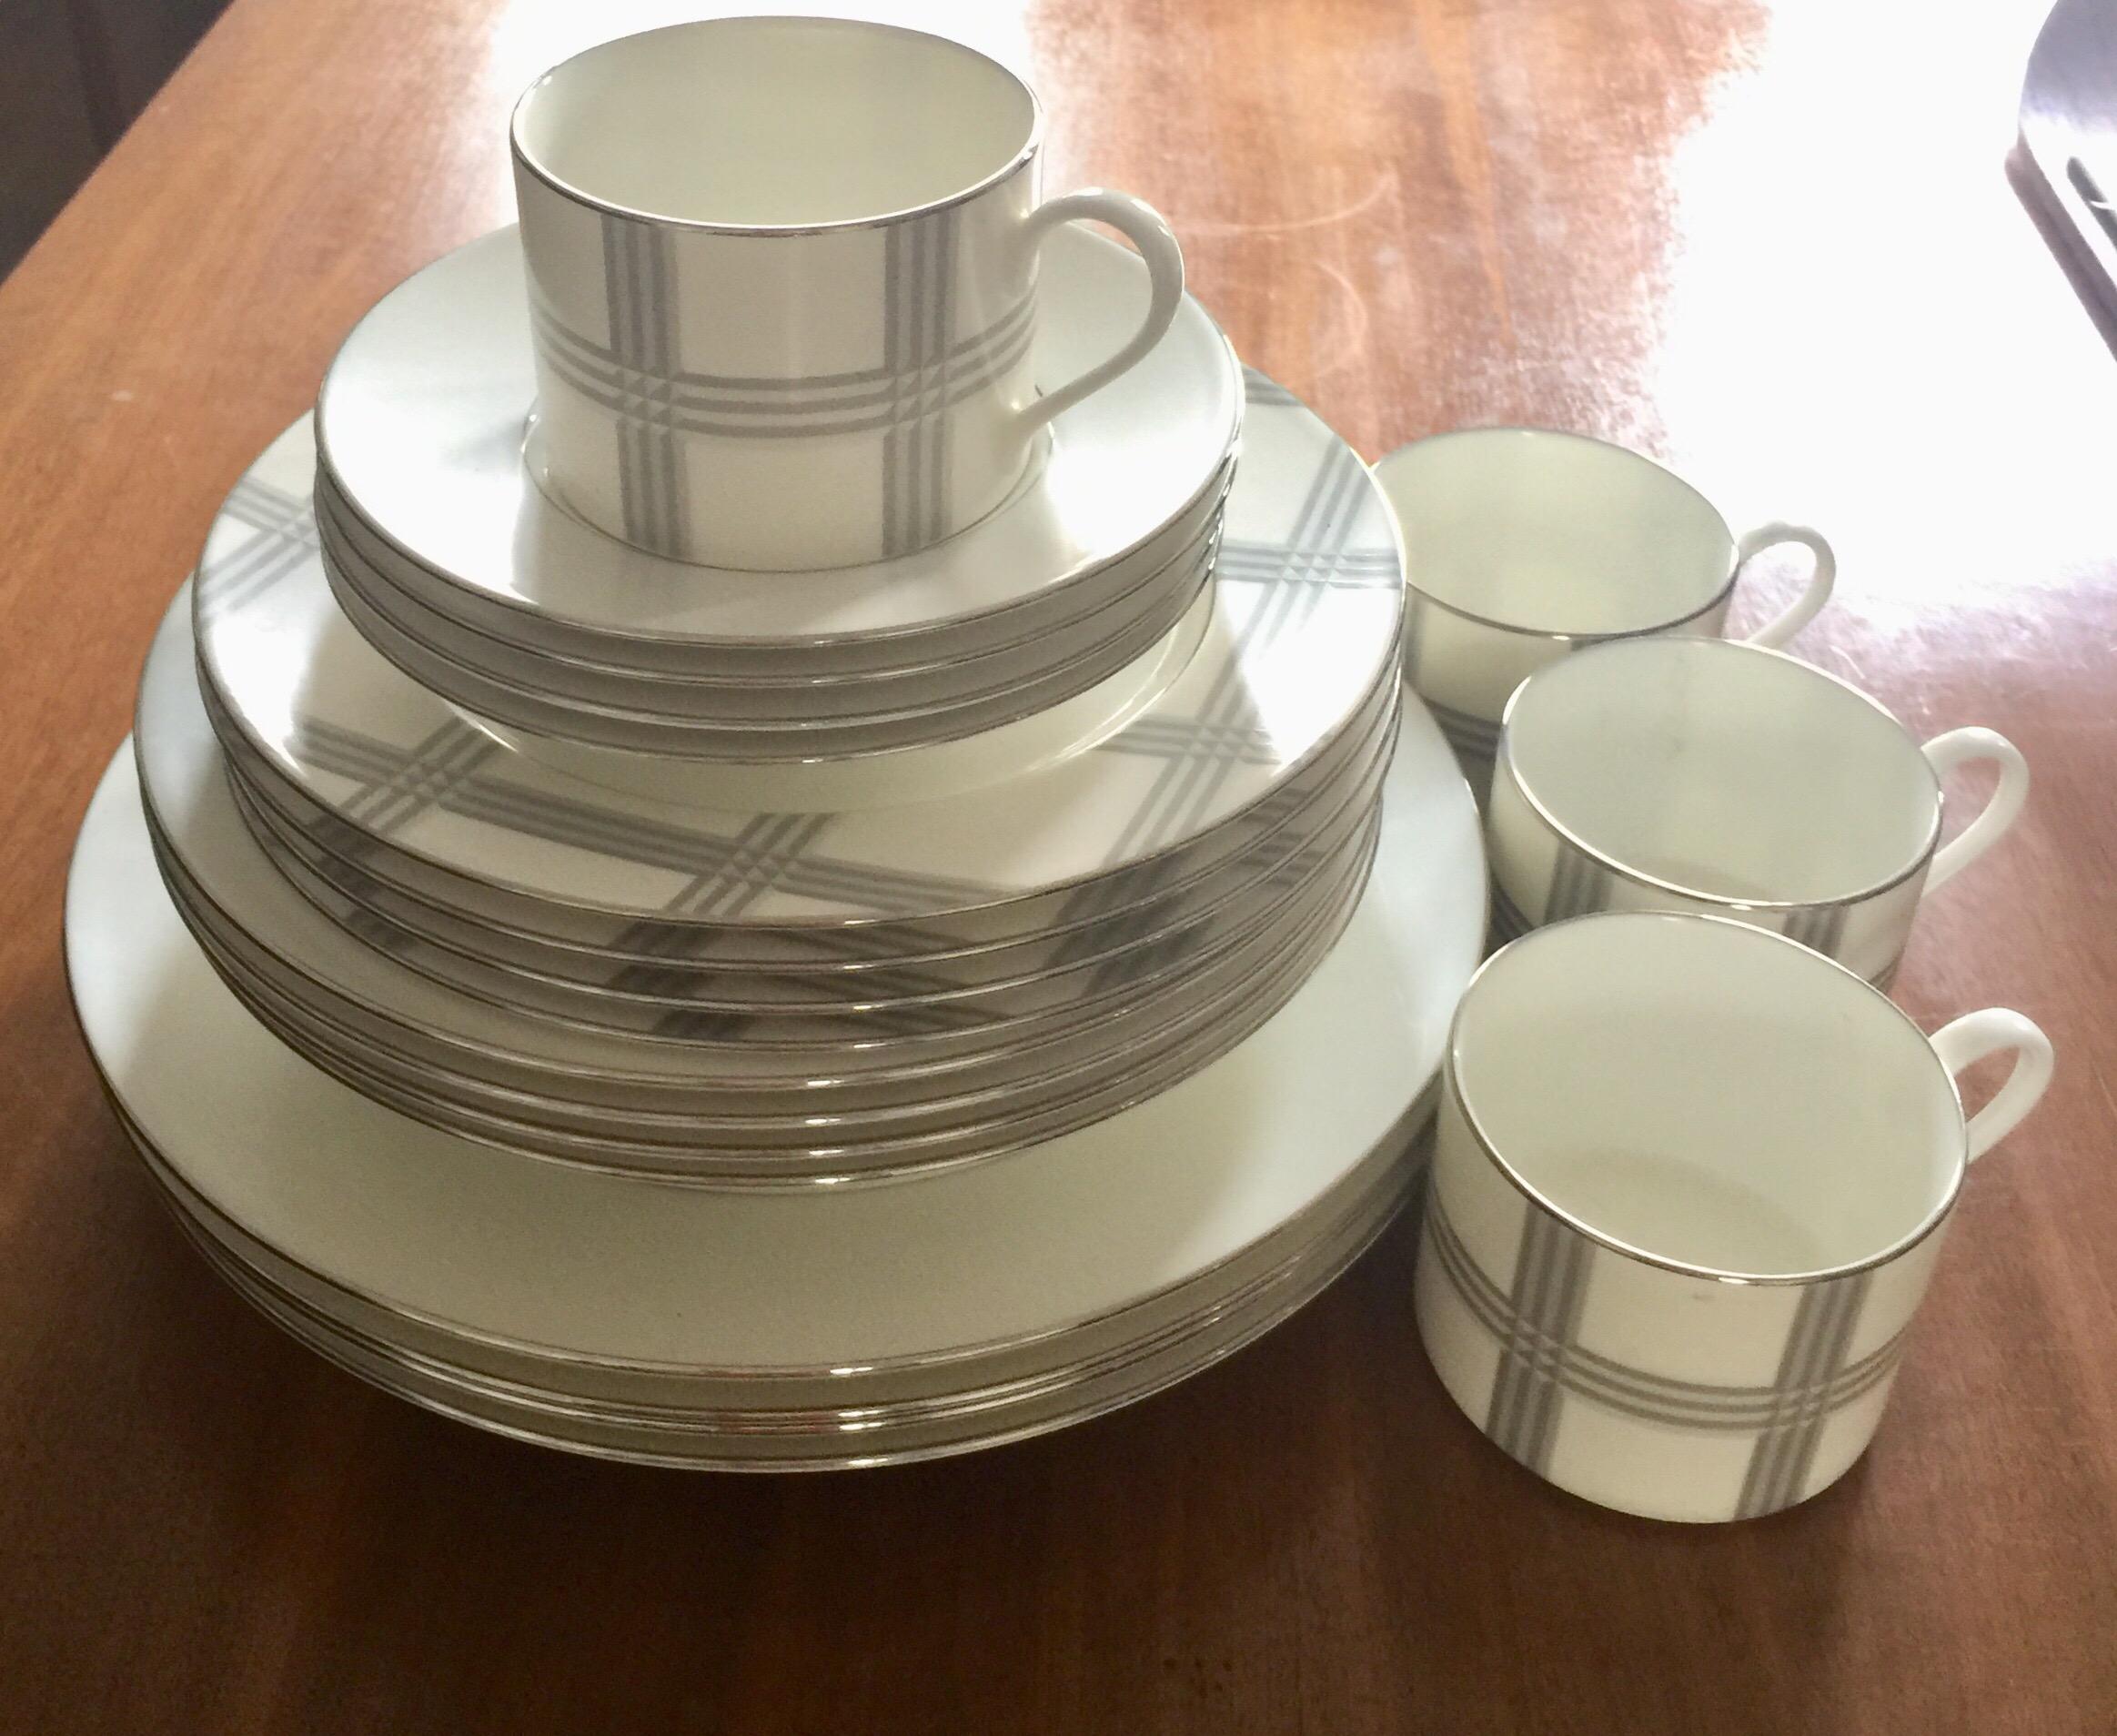 A set of 4 (four) place settings in the Glen Plaid pattern by Ralph Lauren. Signed. Imported, circa 2010.

White with beige pattern.

Fine porcelain.

A total of 20 total pieces. 

Each setting includes the following 5 (five) pieces: Dinner